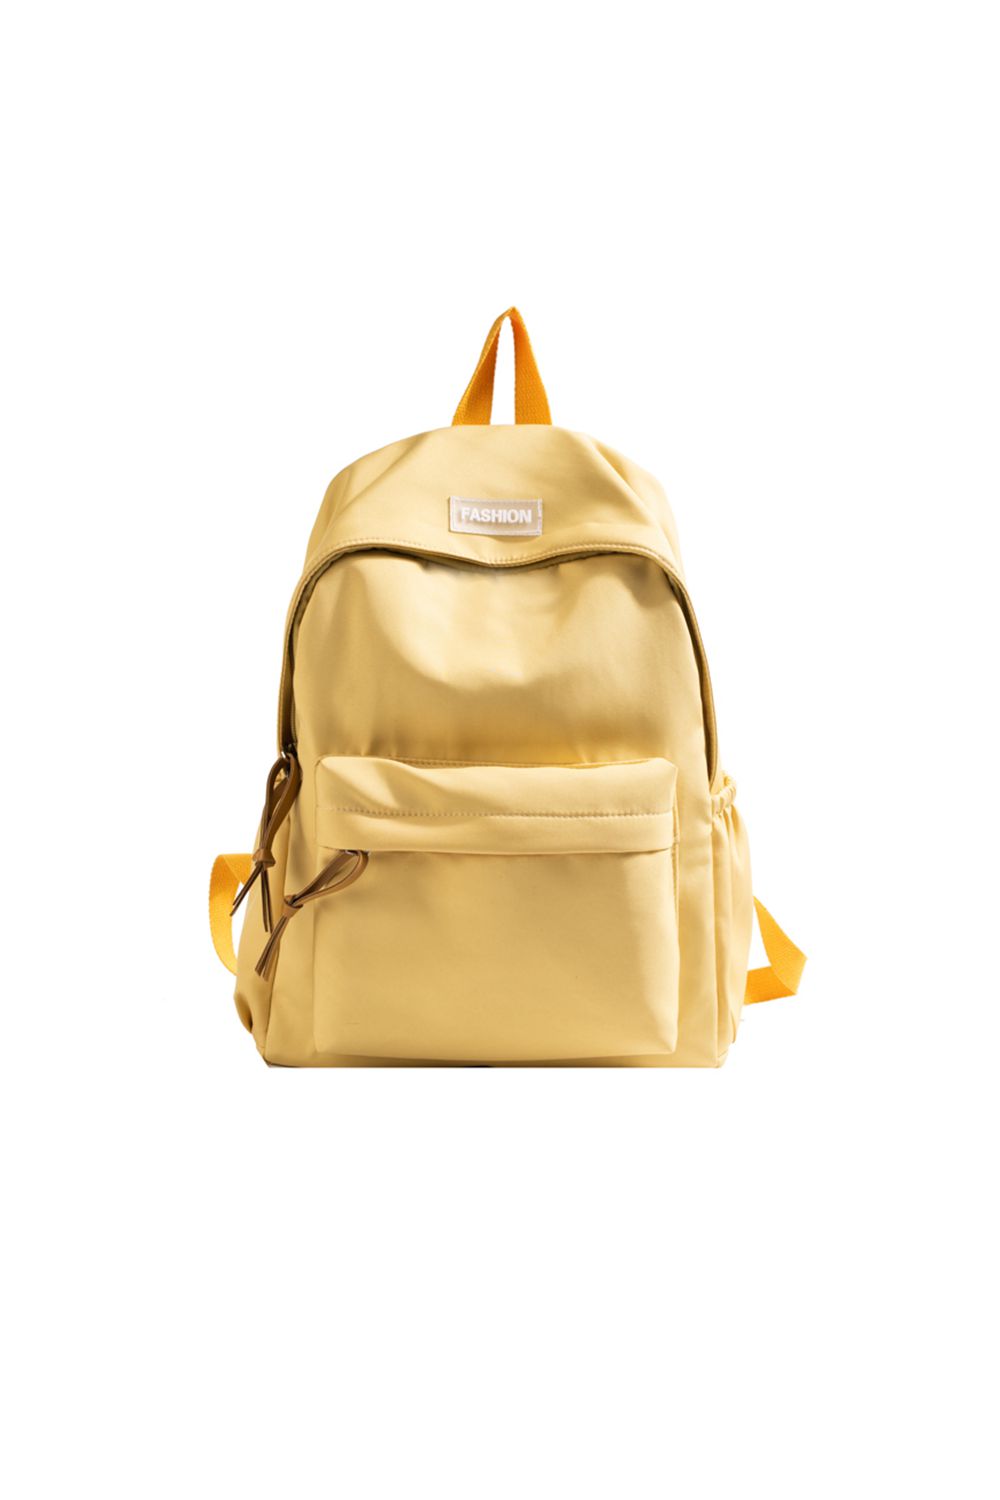 Tan FASHION Polyester Backpack